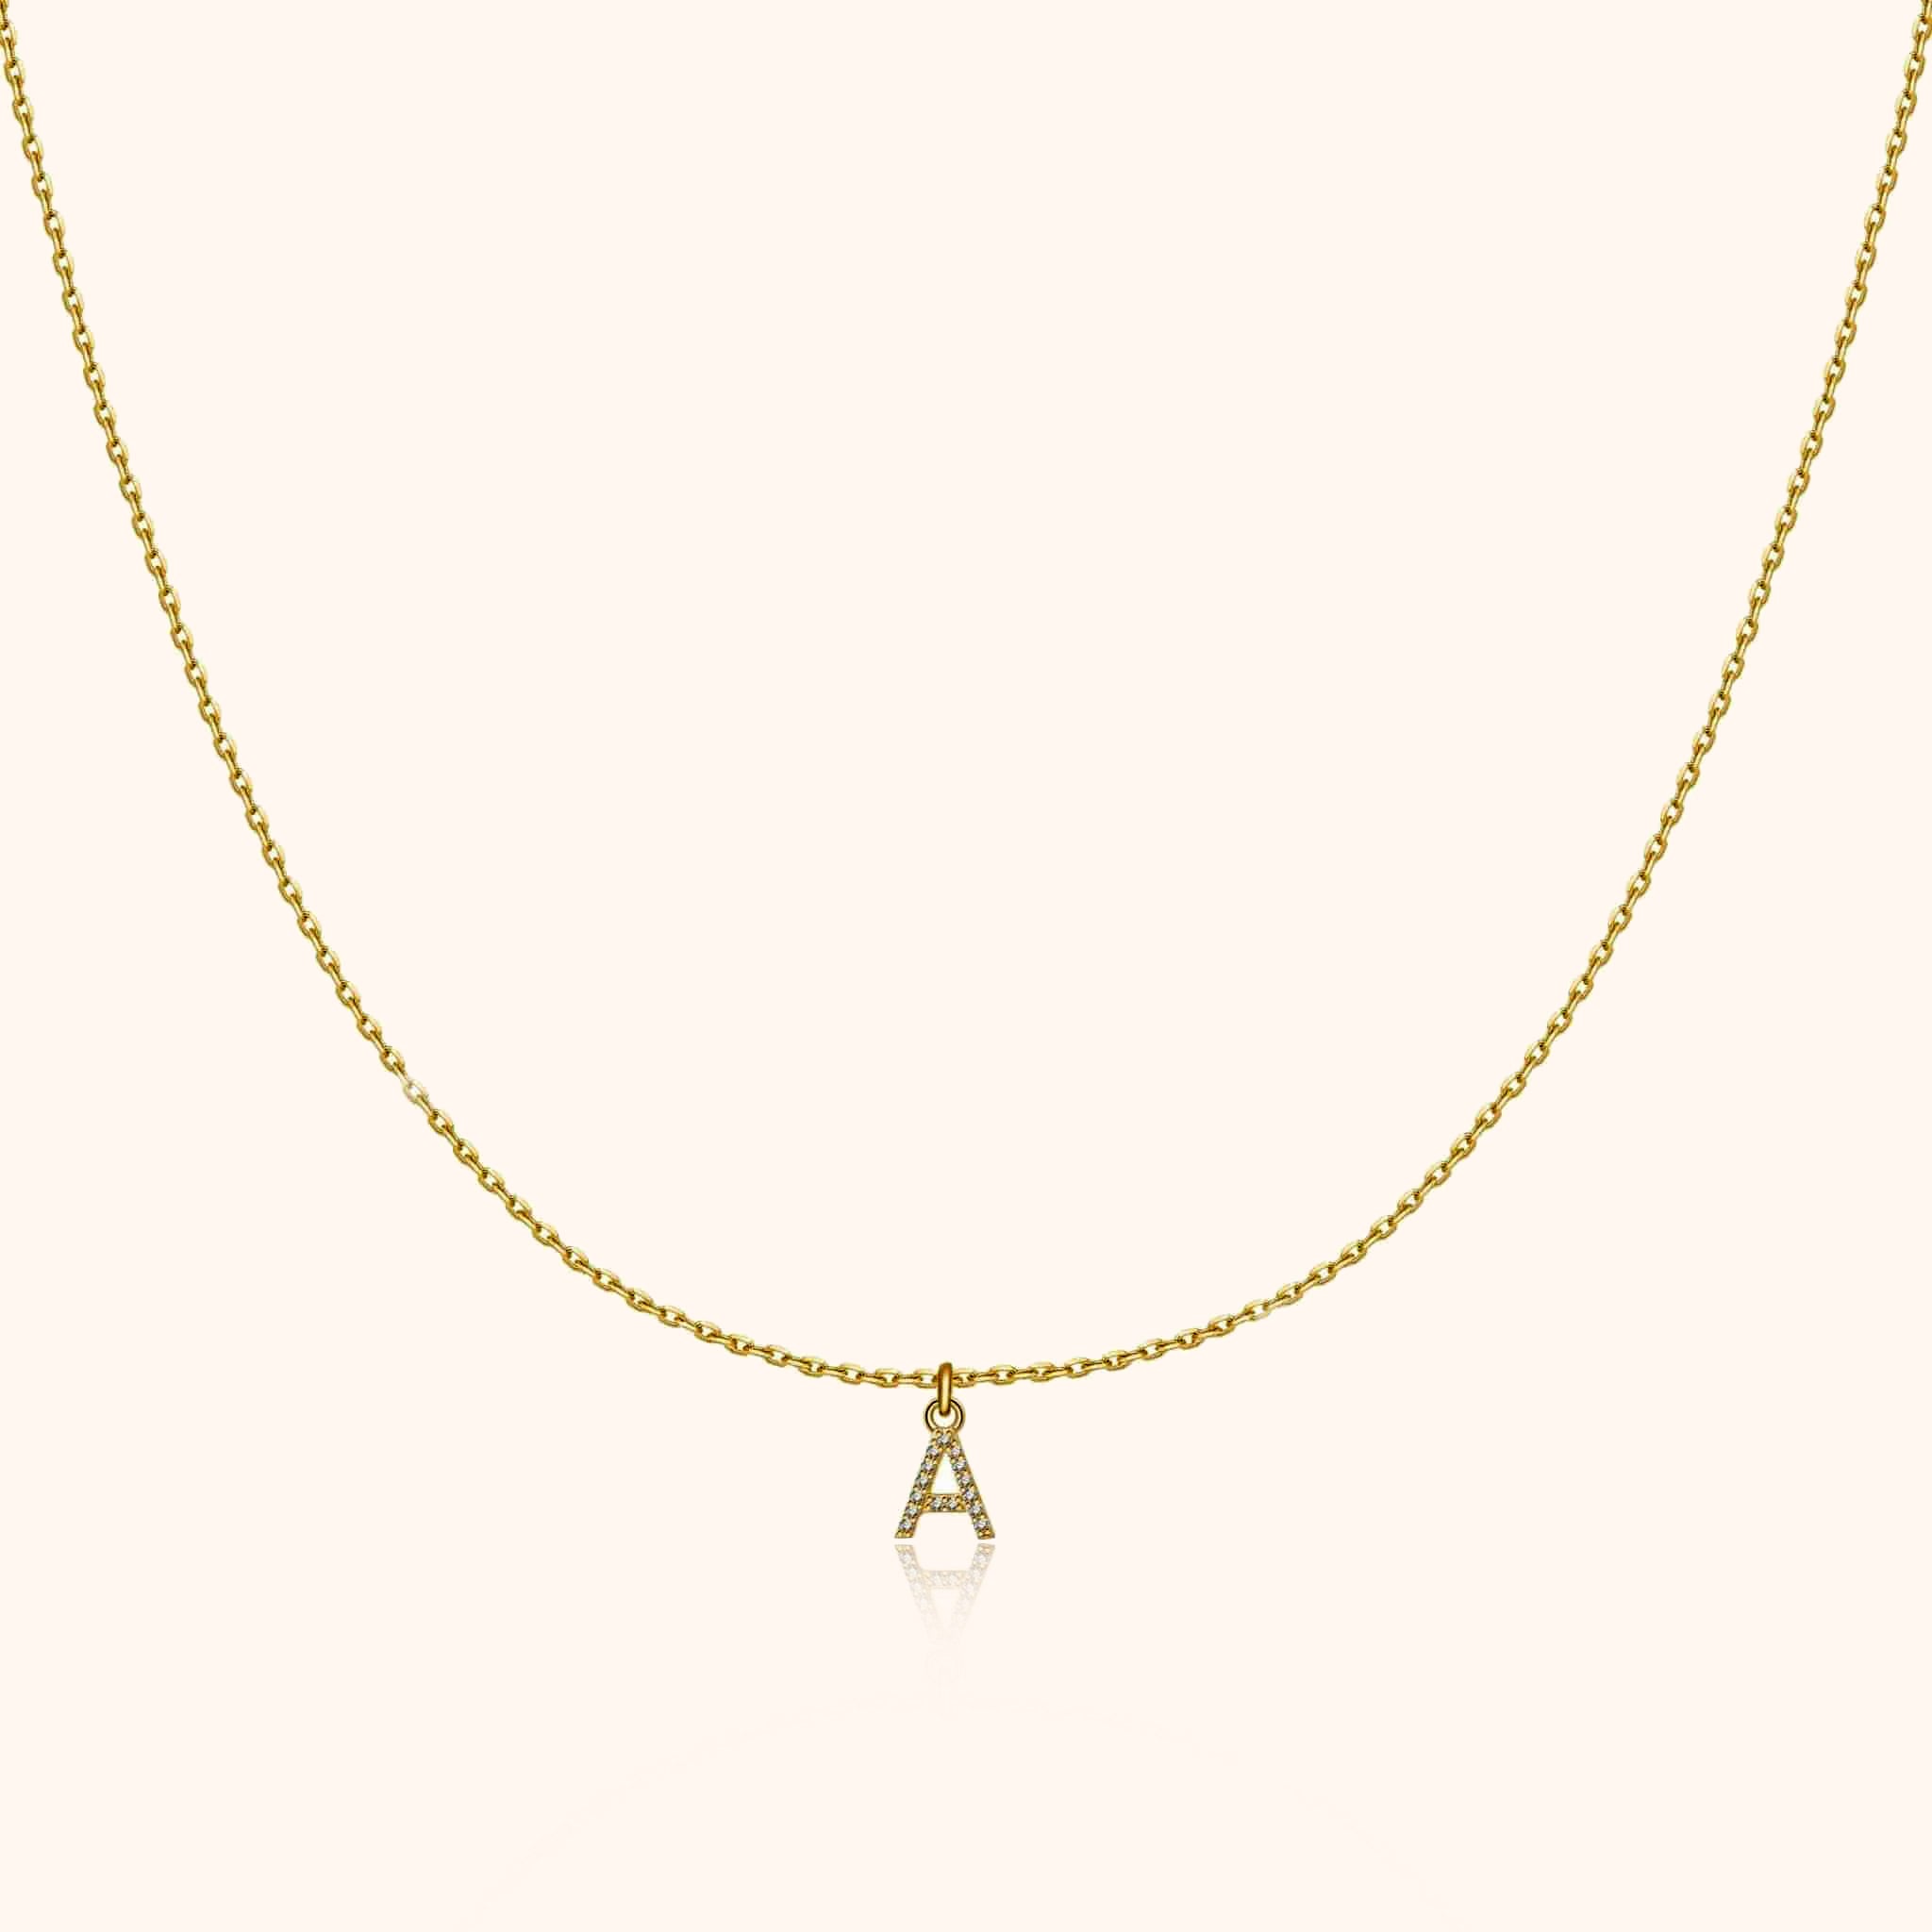 "Little Initial" Necklace